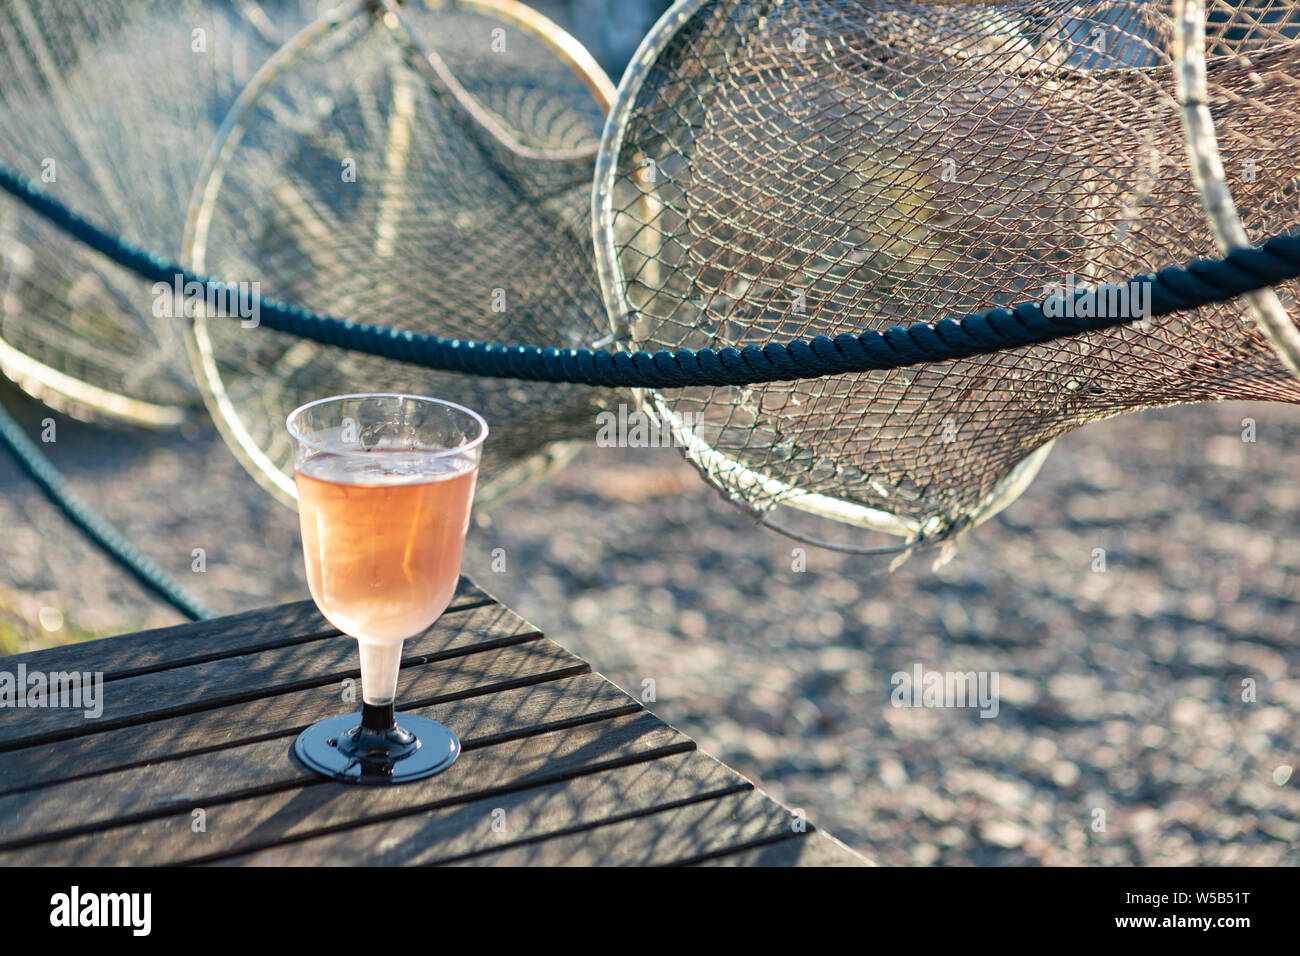 glass of rose wine with a fishing net in the background Stock Photo